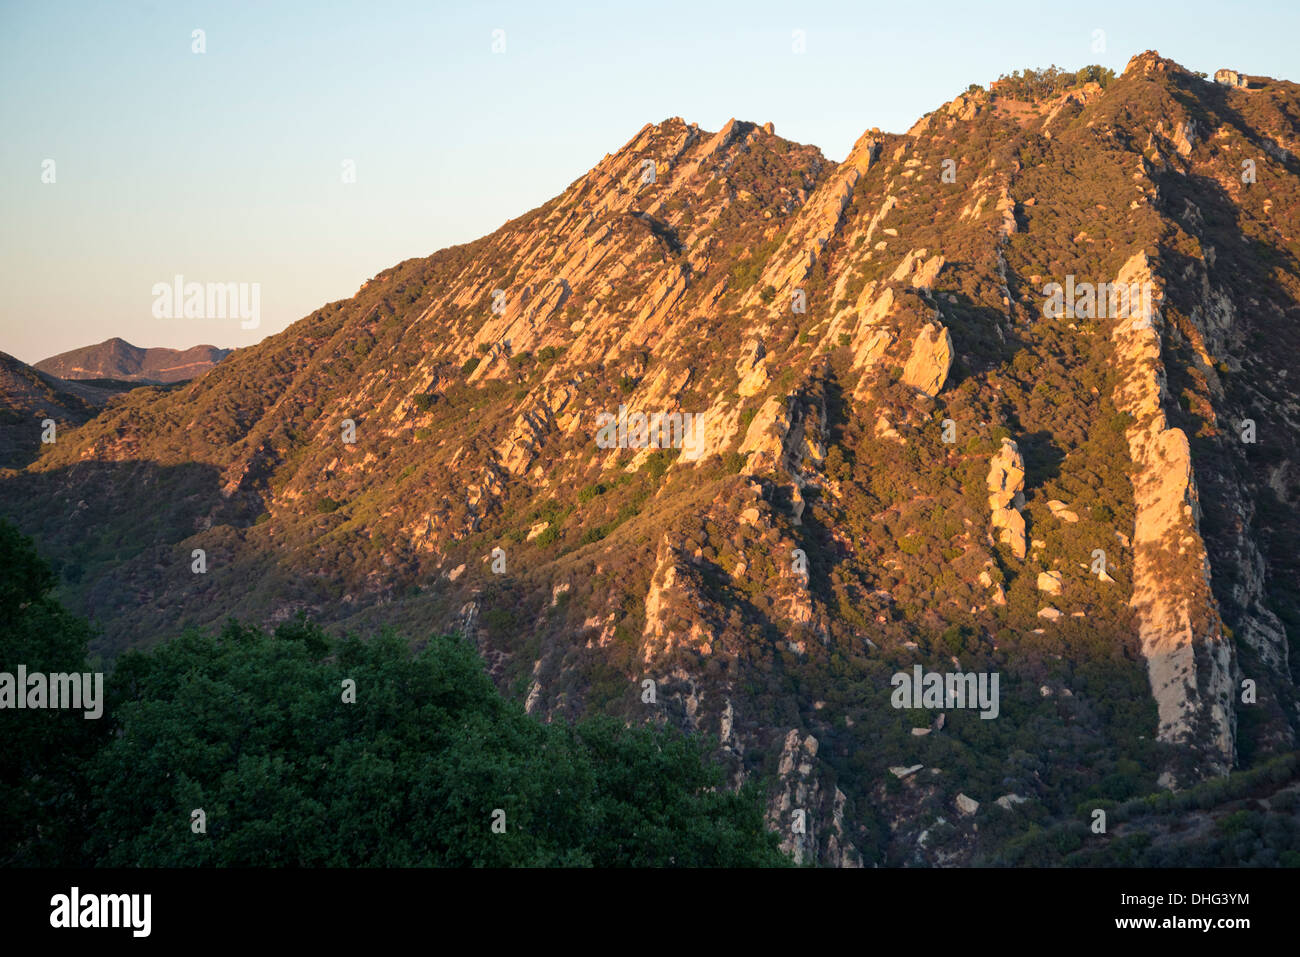 Sunset view of a rocky ridge in the Santa Monica Mountains. Stock Photo